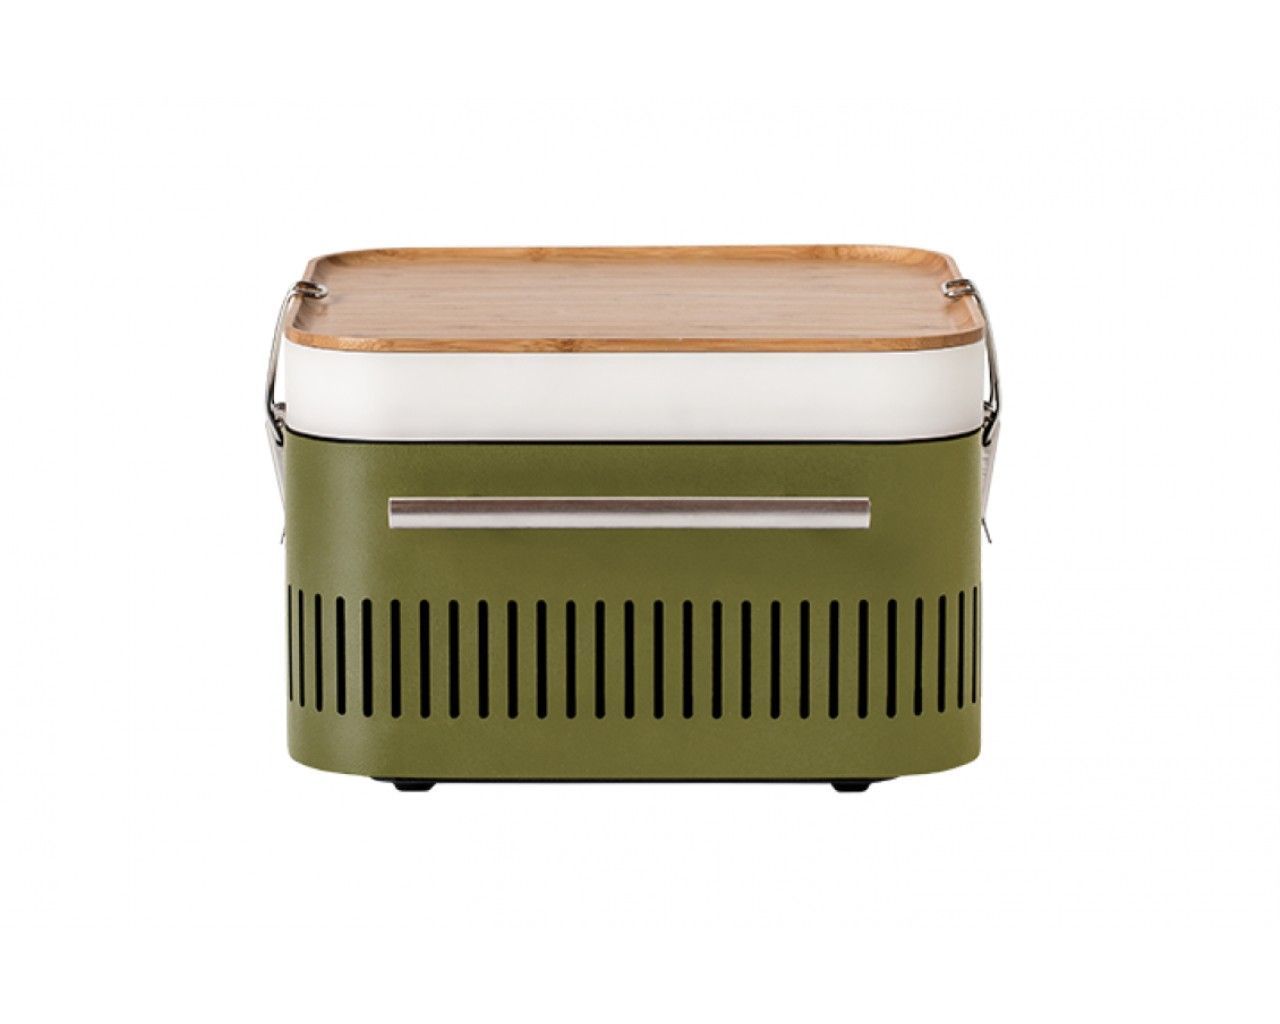 Everdure by Heston Blumenthal CUBE Charcoal Portable Barbeque - Khaki, Khaki, hi-res image number null